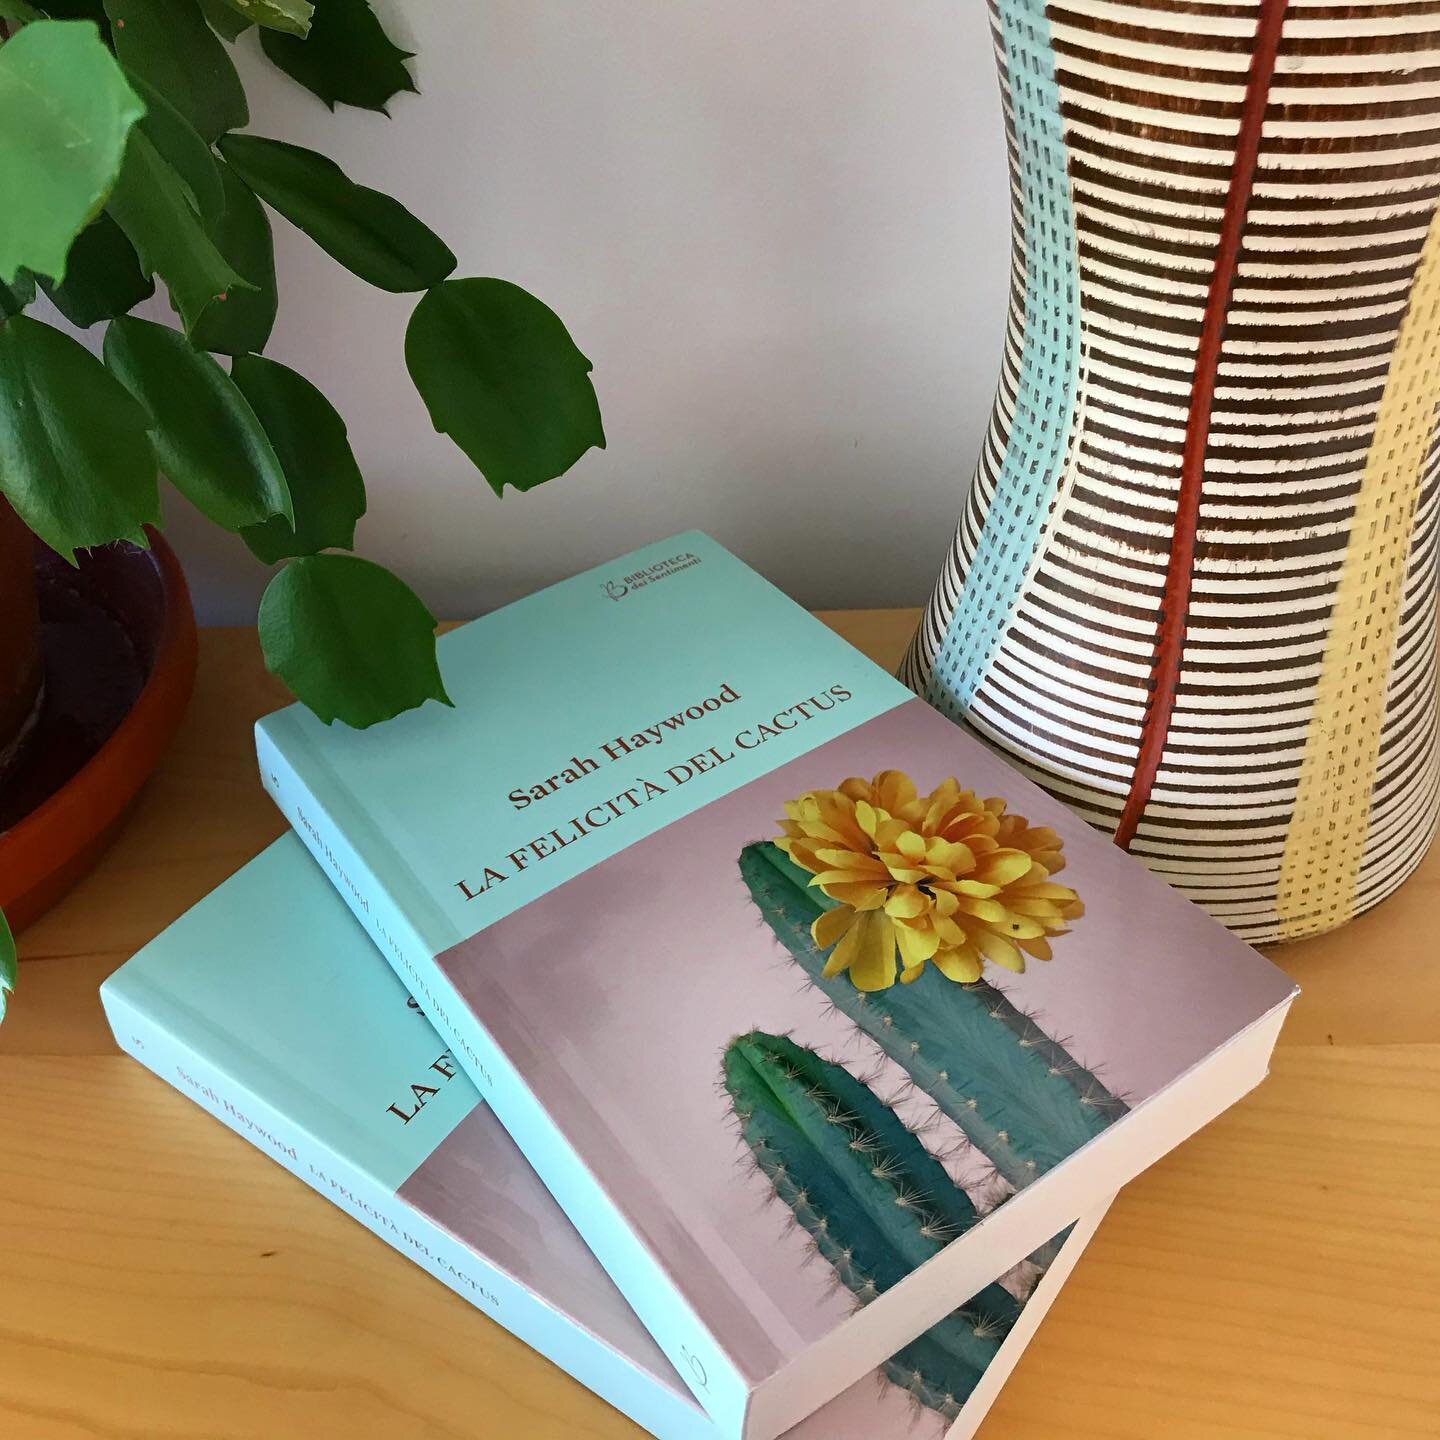 I&rsquo;m always excited to receive a new edition of The Cactus. This Italian &lsquo;kiosk&rsquo; edition arrived today. I love the colours and the simplicity of the design 🌼🌵
#TheCactus #lafelicitadelcactus